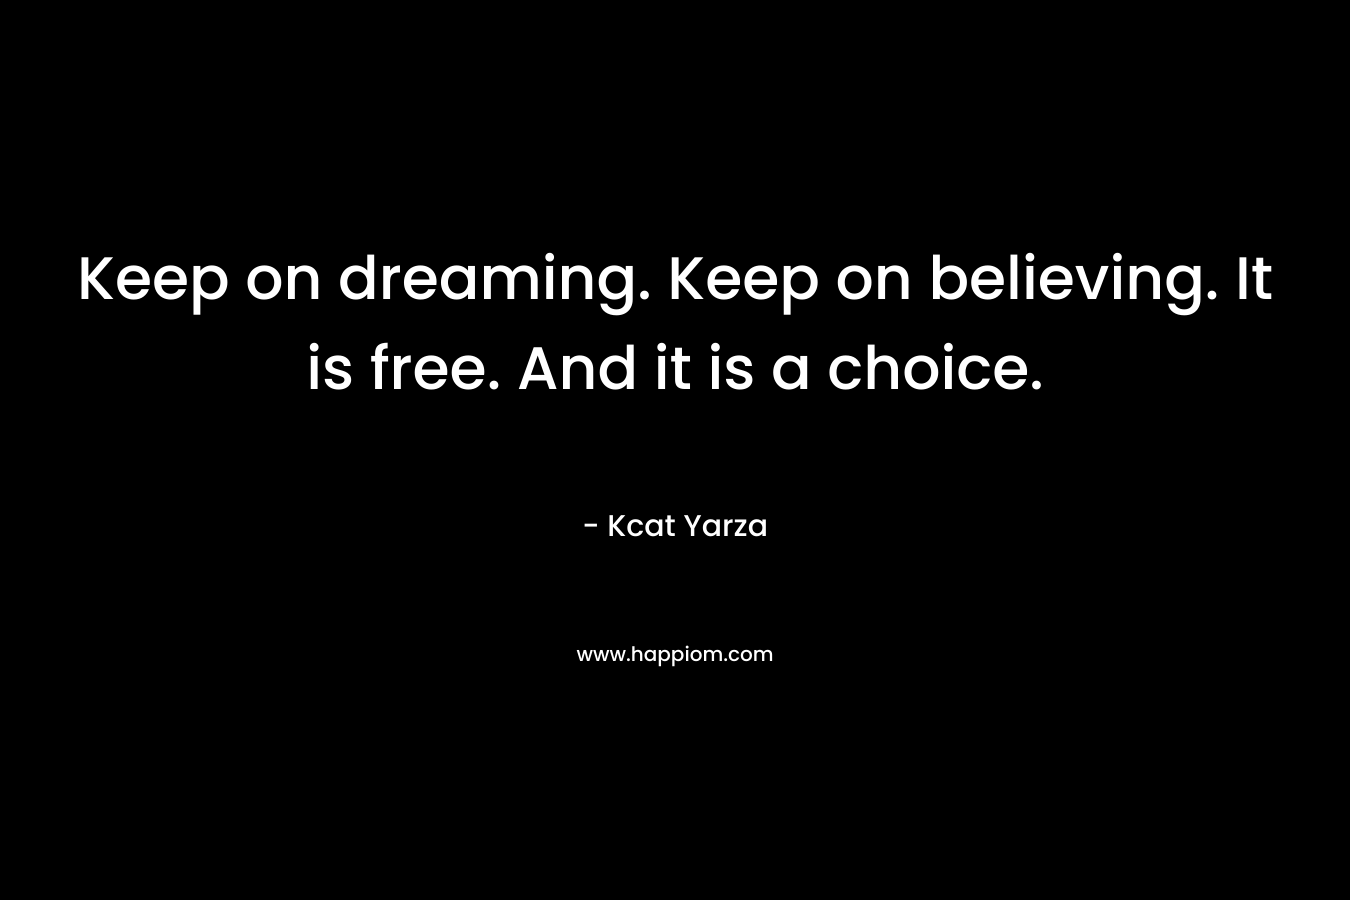 Keep on dreaming. Keep on believing. It is free. And it is a choice. – Kcat Yarza